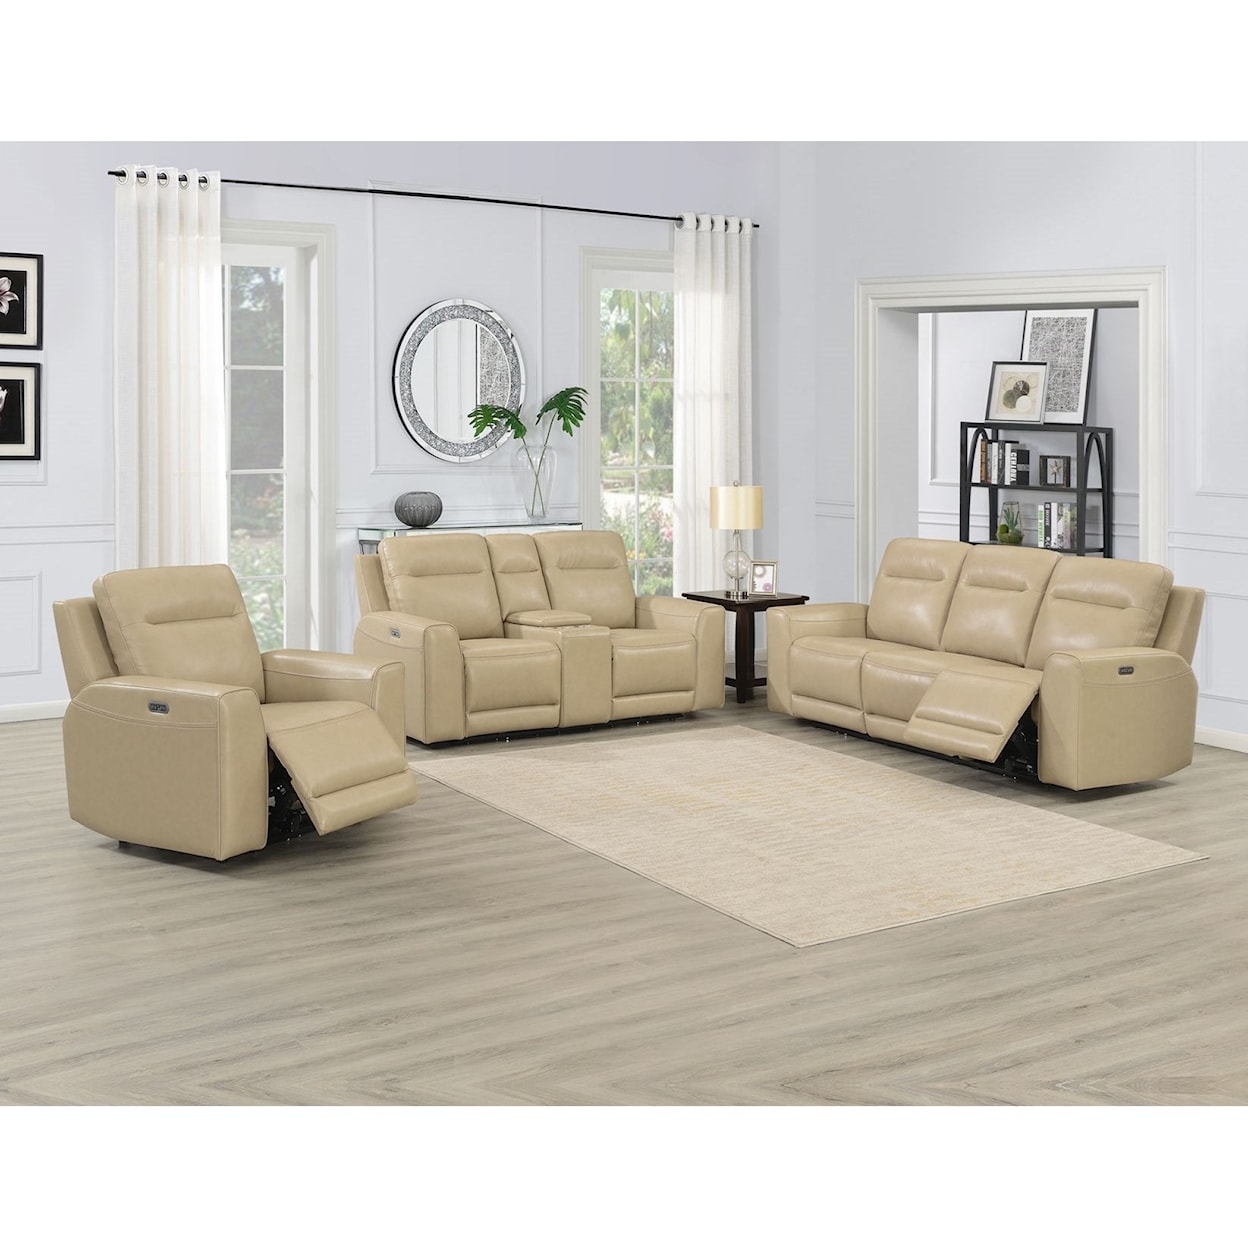 Steve Silver Doncella Power Reclining Living Room Group